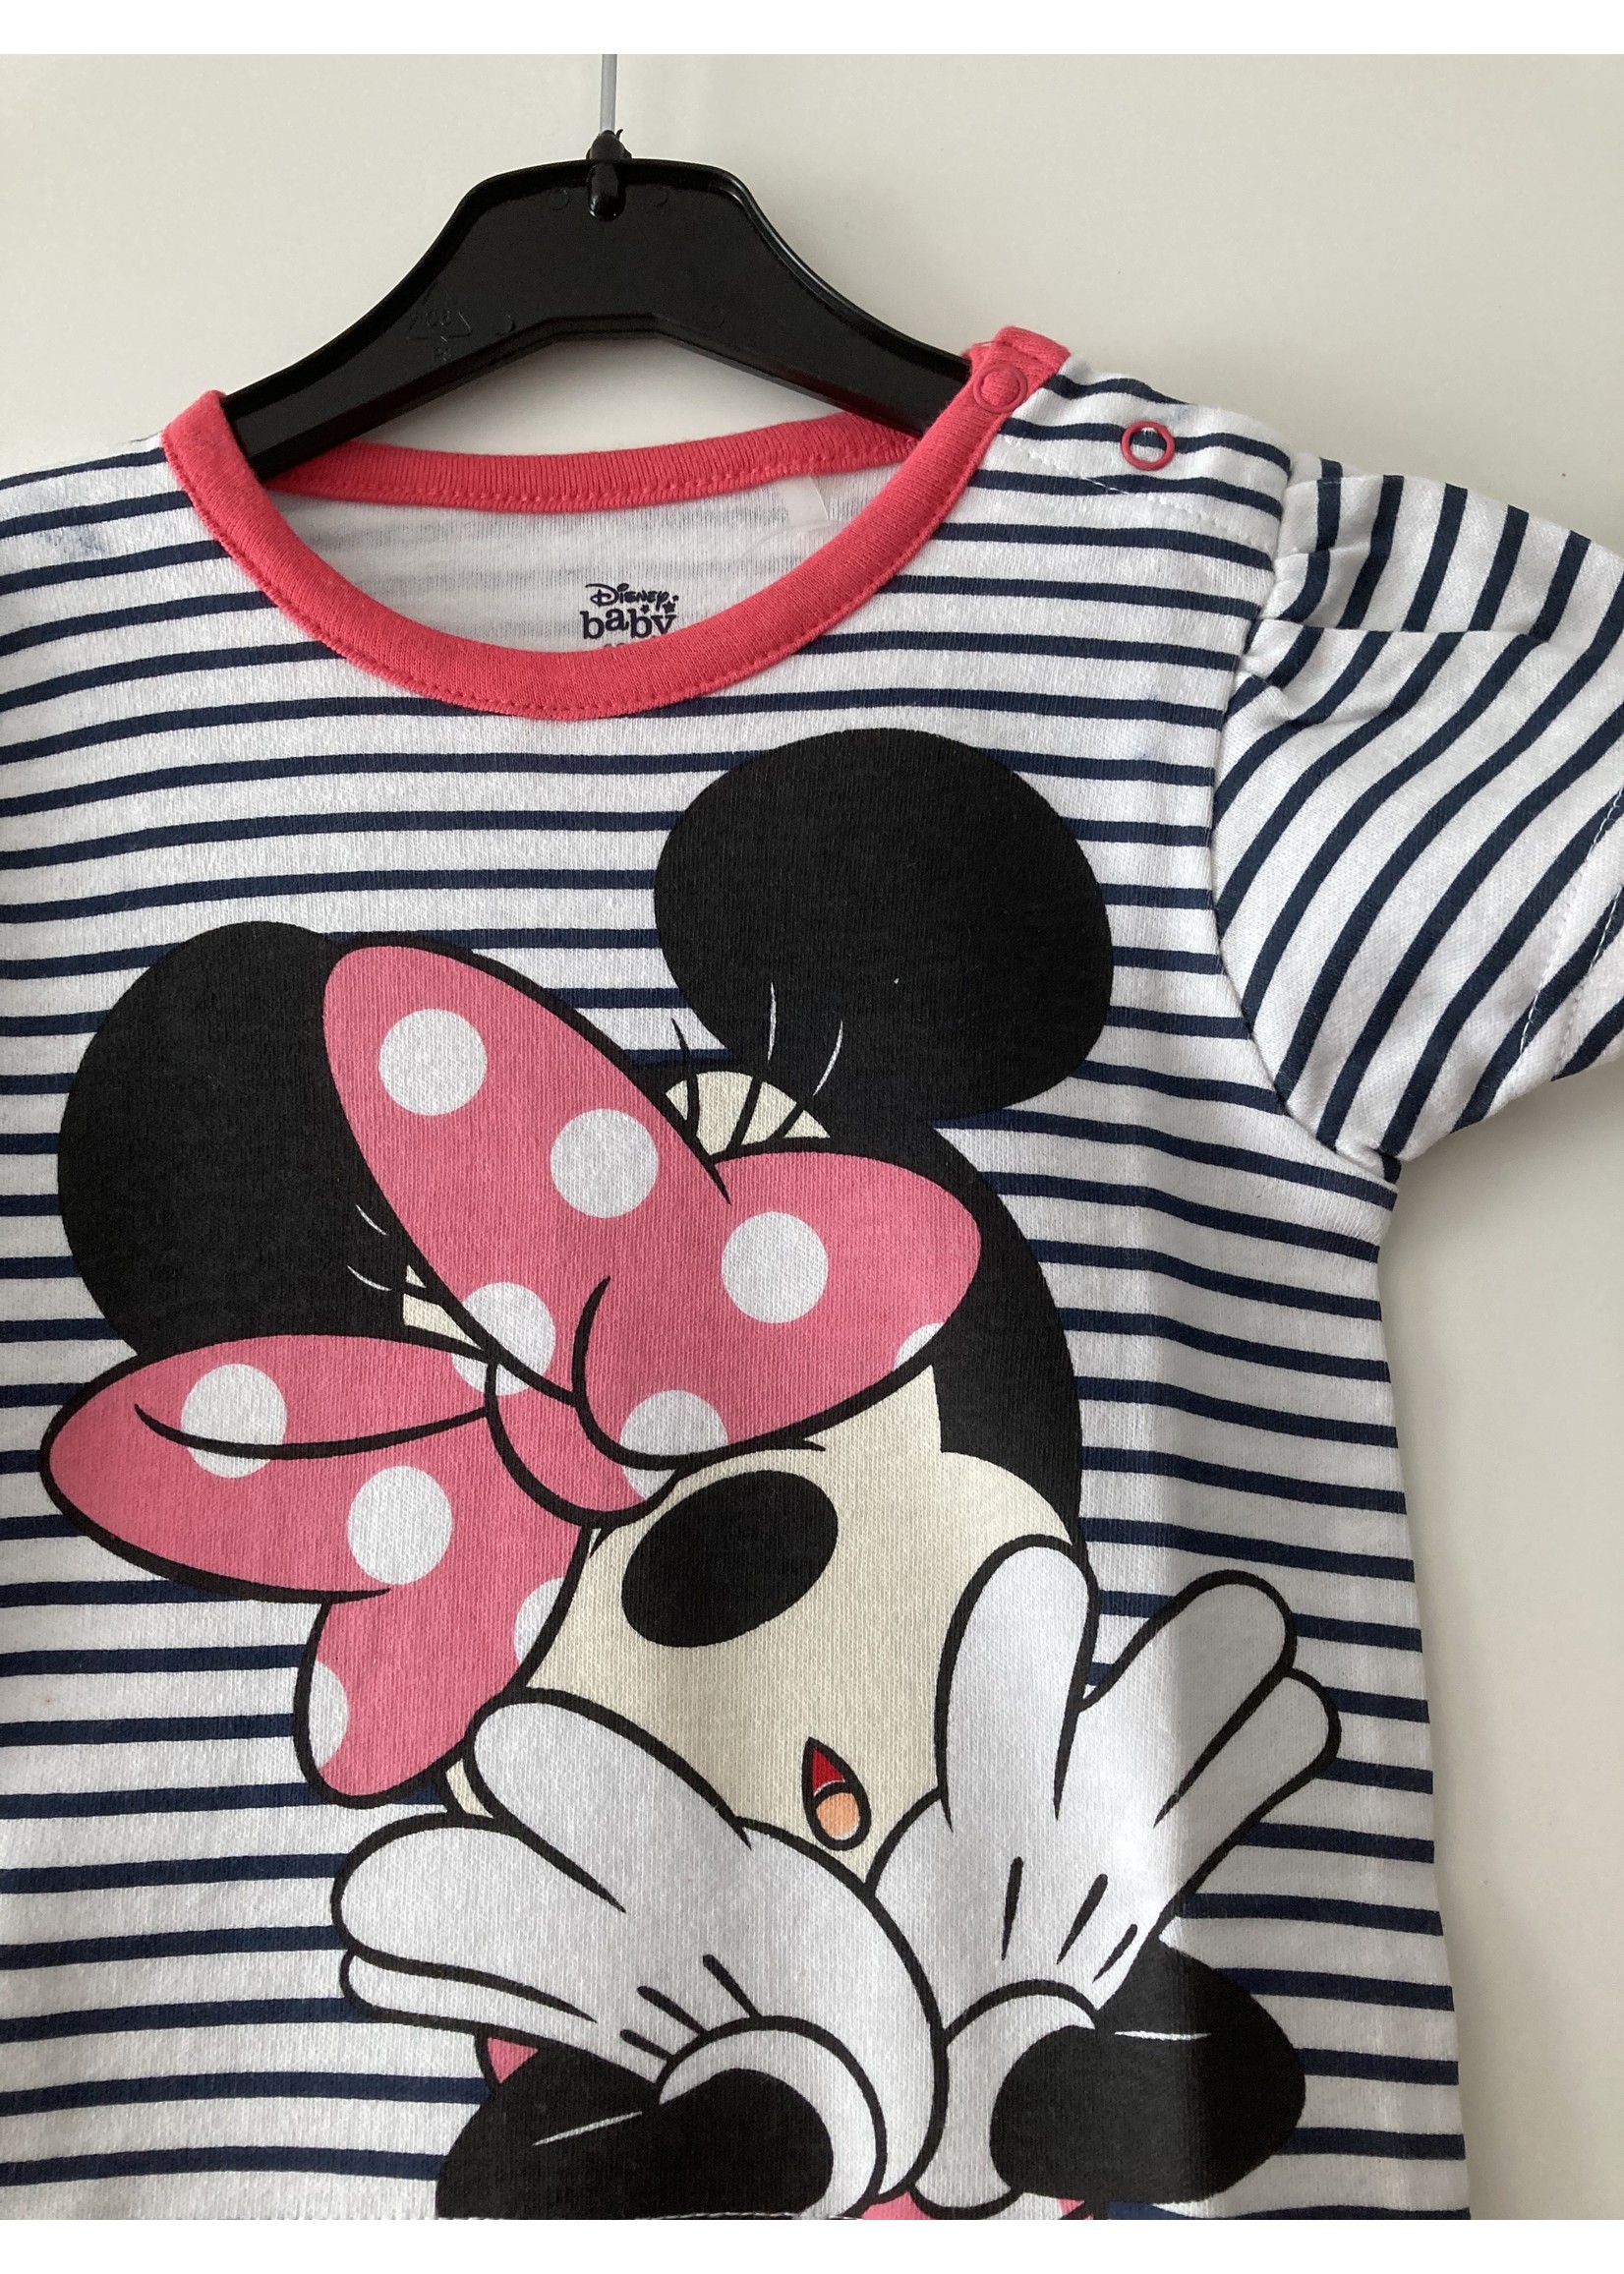 Disney baby Minnie Mouse playsuit from Disney baby red